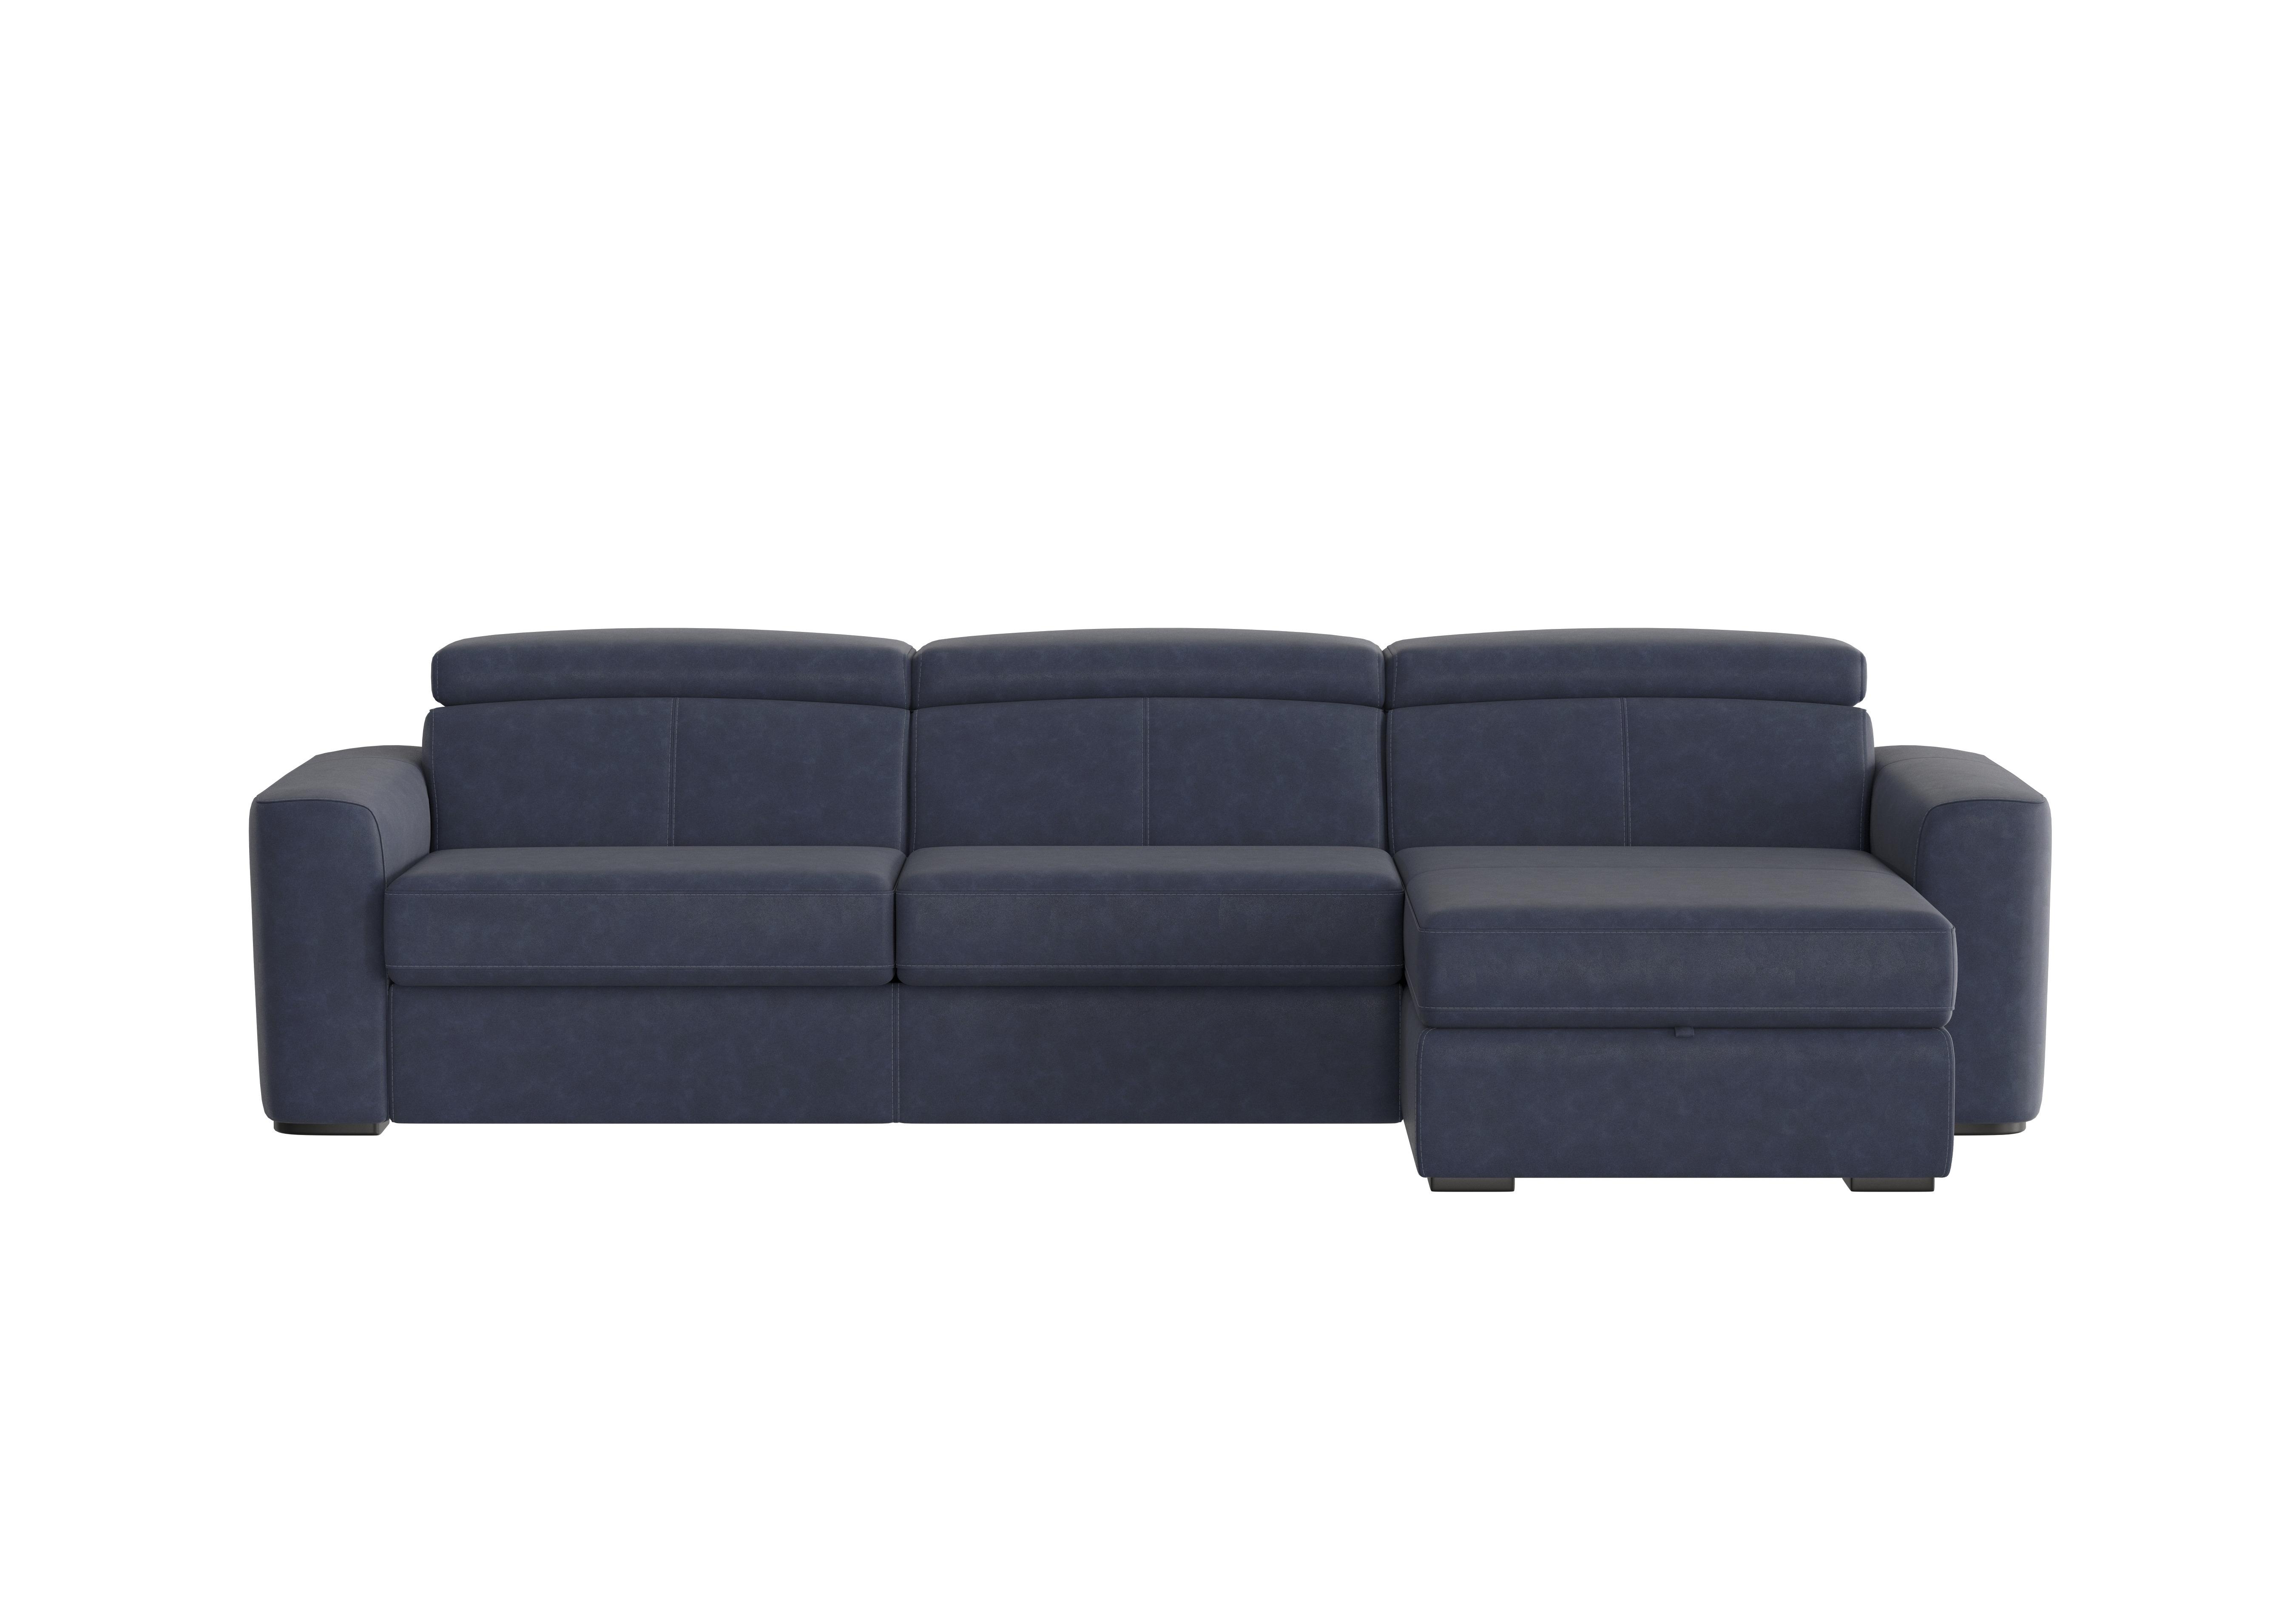 Infinity Fabric Corner Chaise Sofa Bed with Storage in Bfa-Ori-R23 Blue on Furniture Village